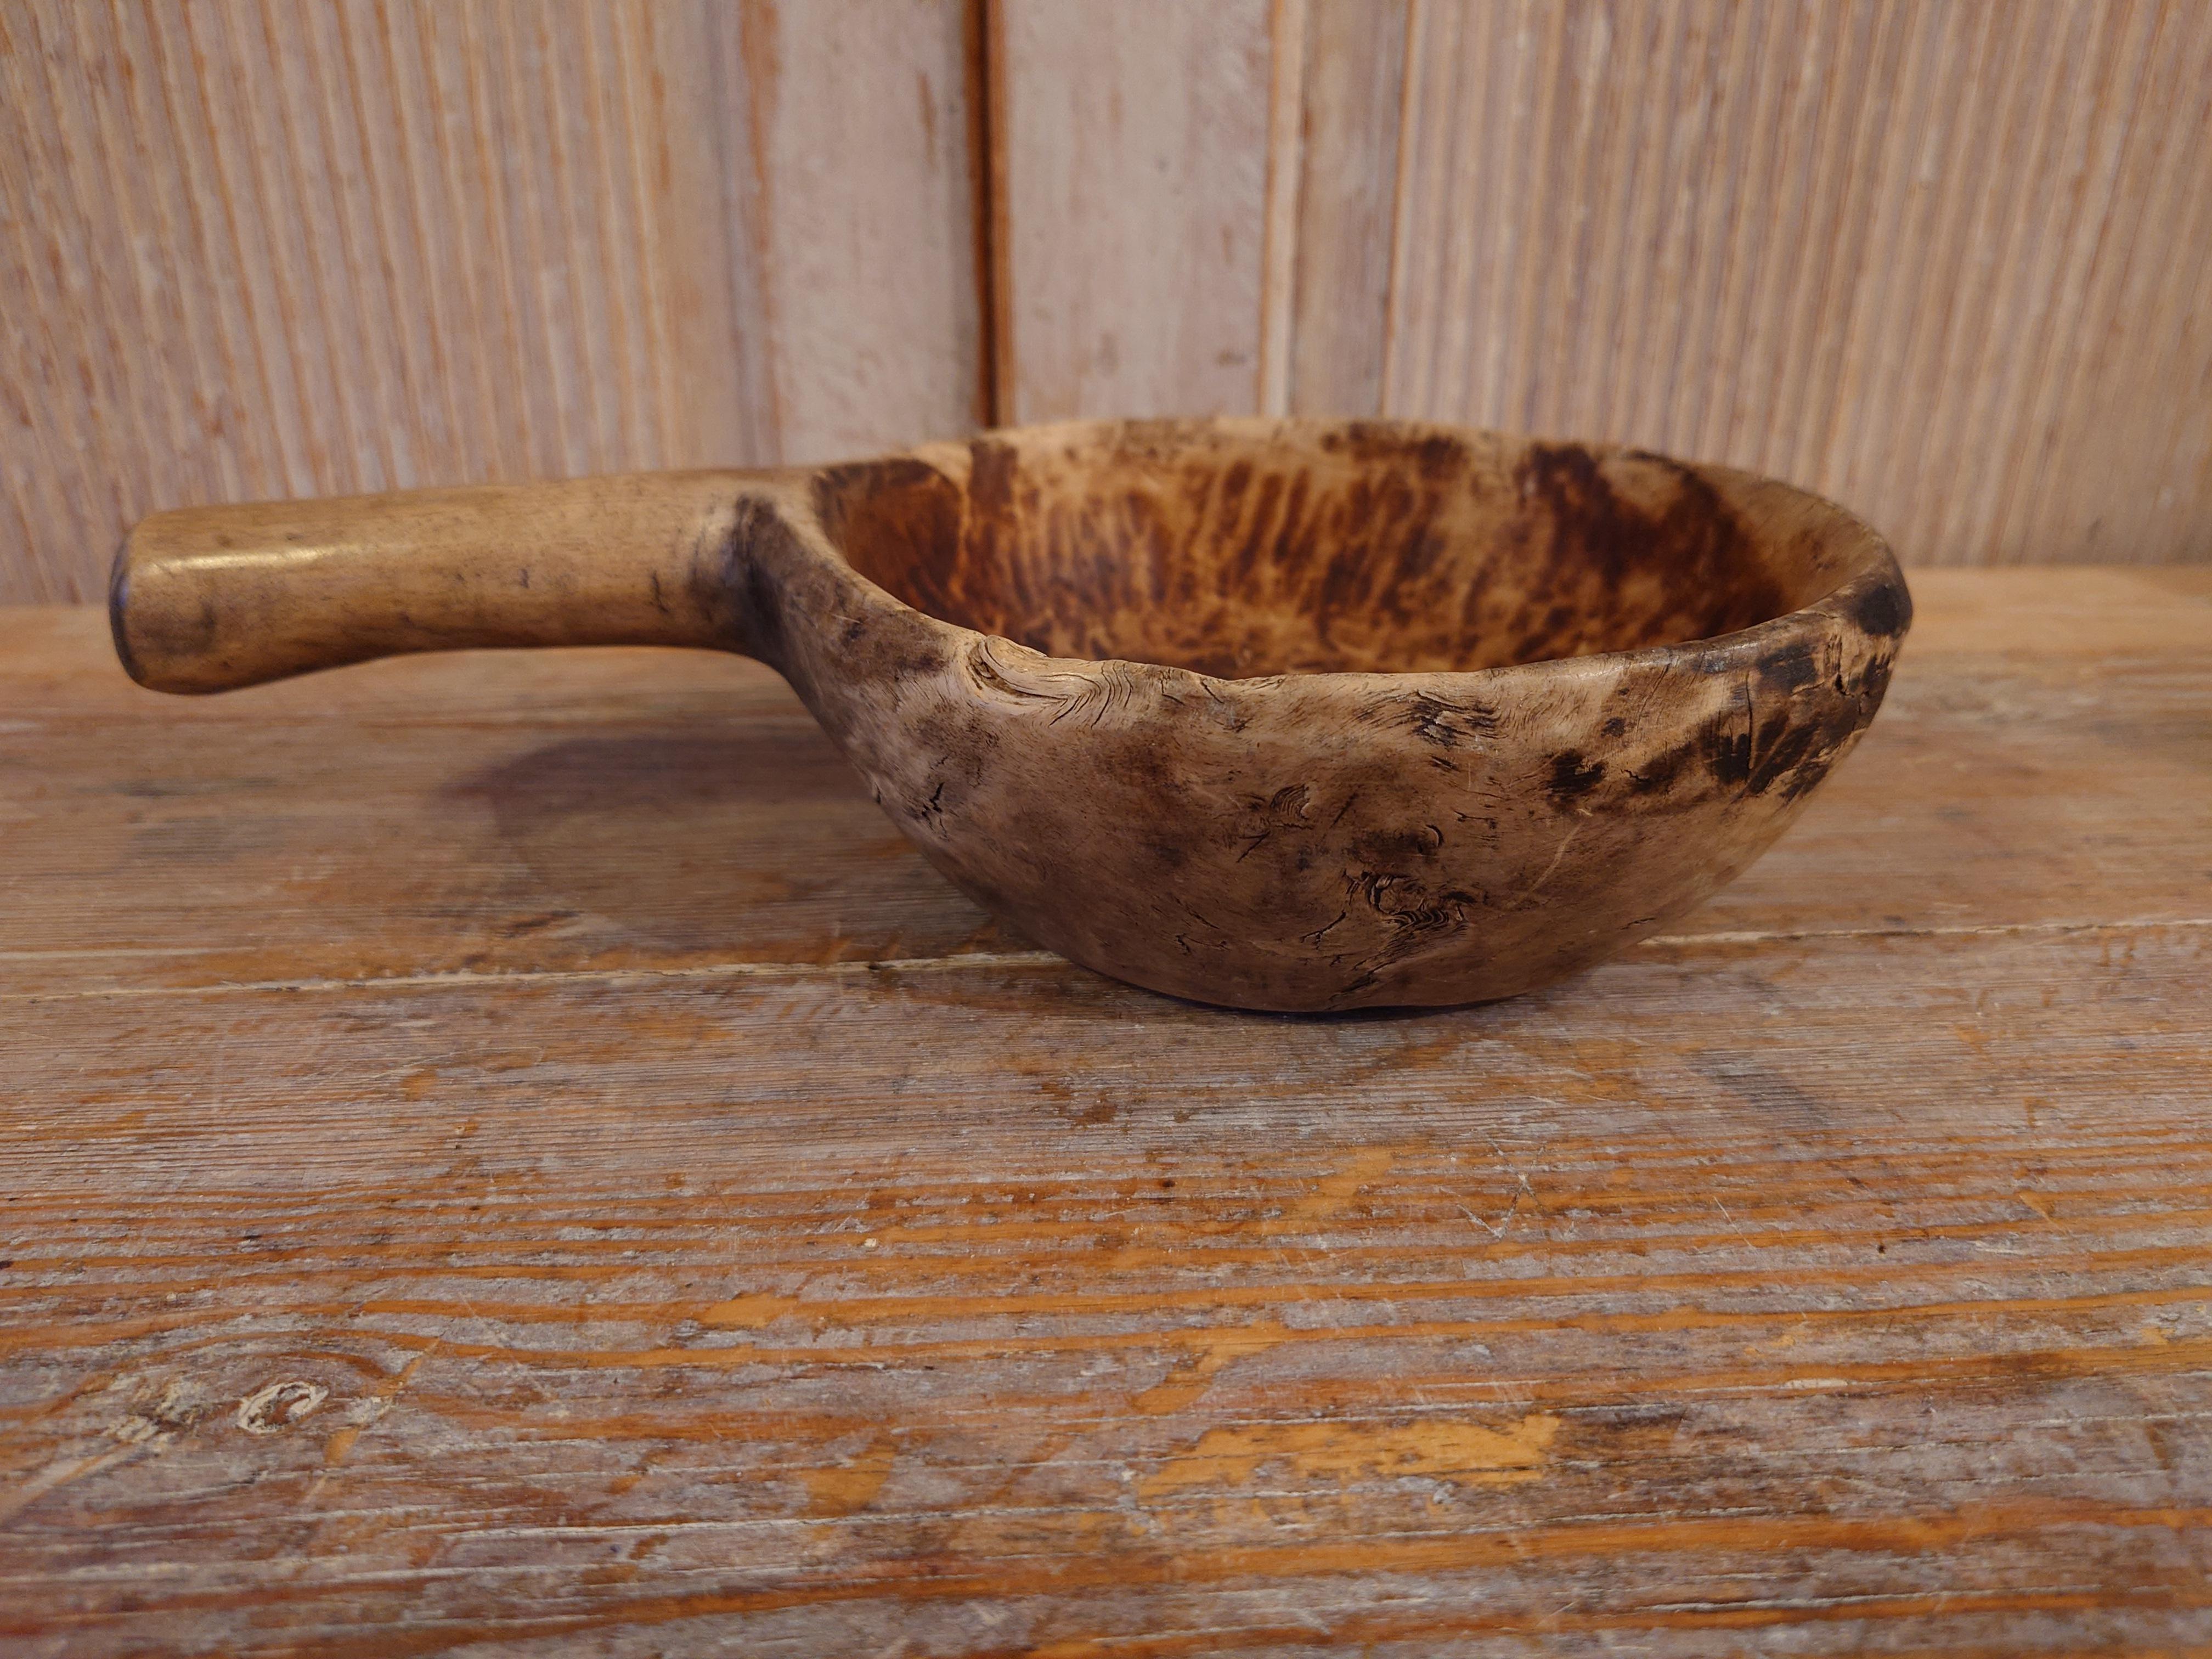 19th Century Swedish antique handmade wood bowl with handle from the first half of the 19th century. Dated 1831 .The bowl with handle from northern Sweden is in Swedish called 